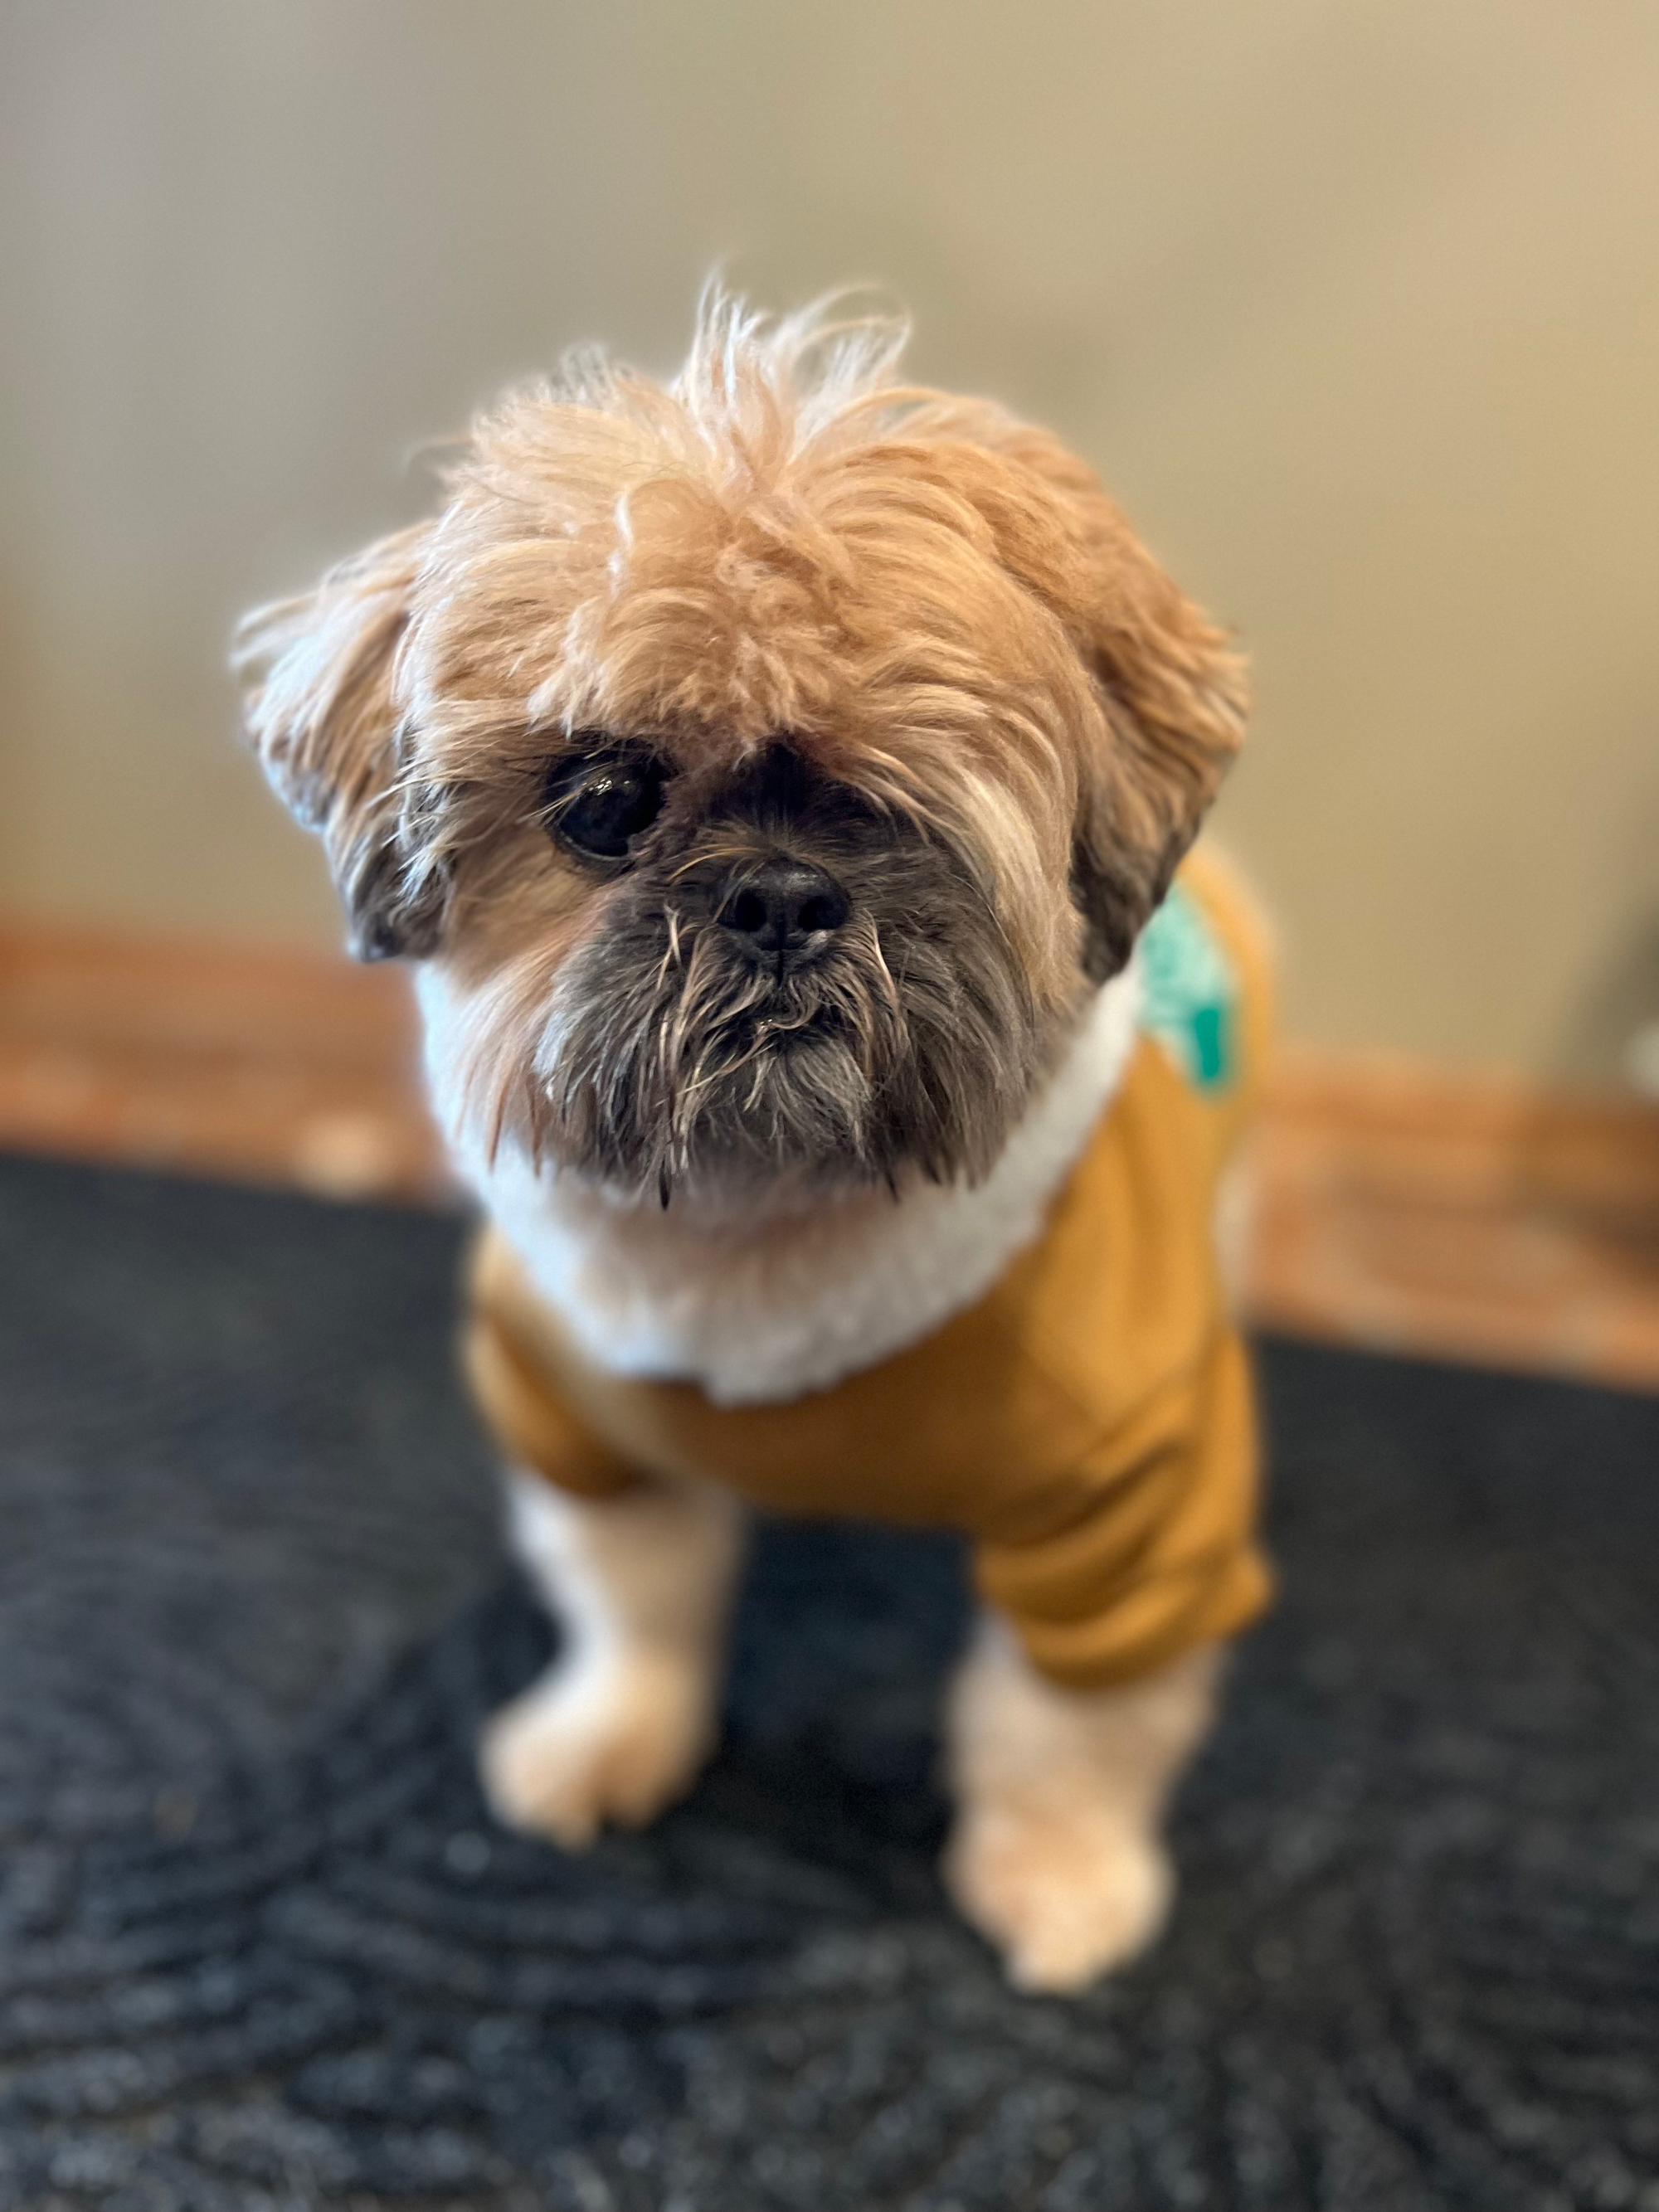 Loving Our Pets with Disabilities - Berkeley, The Shih Tzu